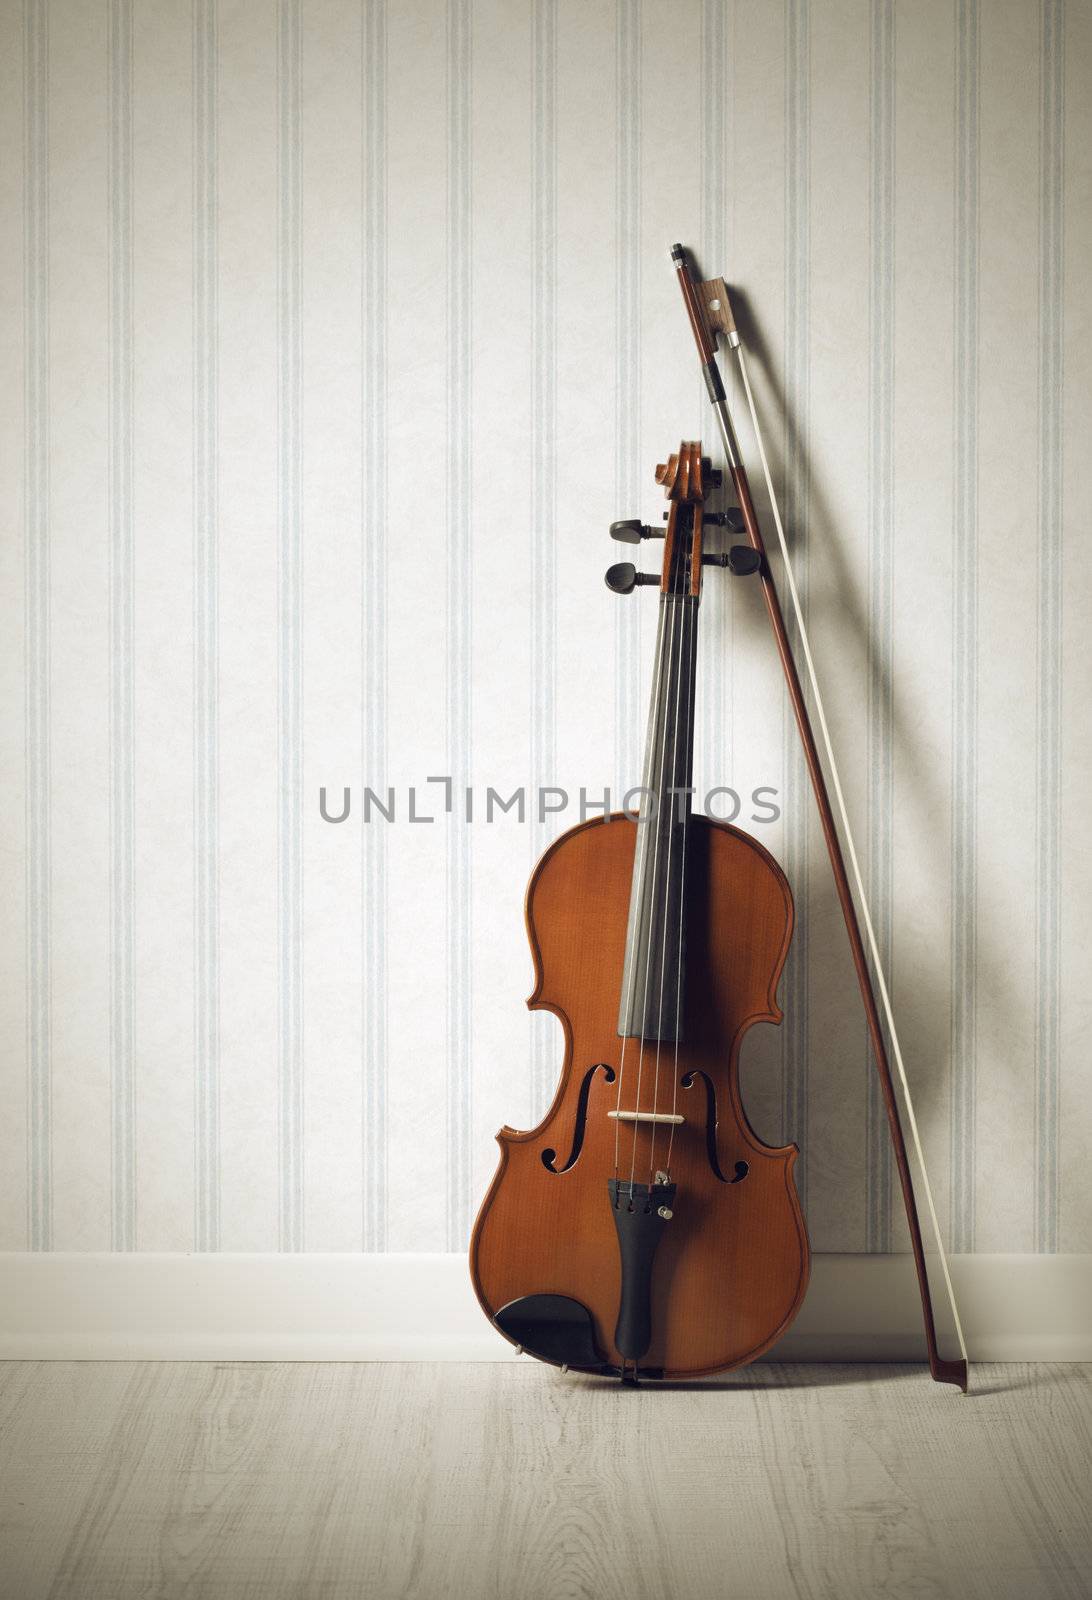 Violin and bow on a vintage wallpaper